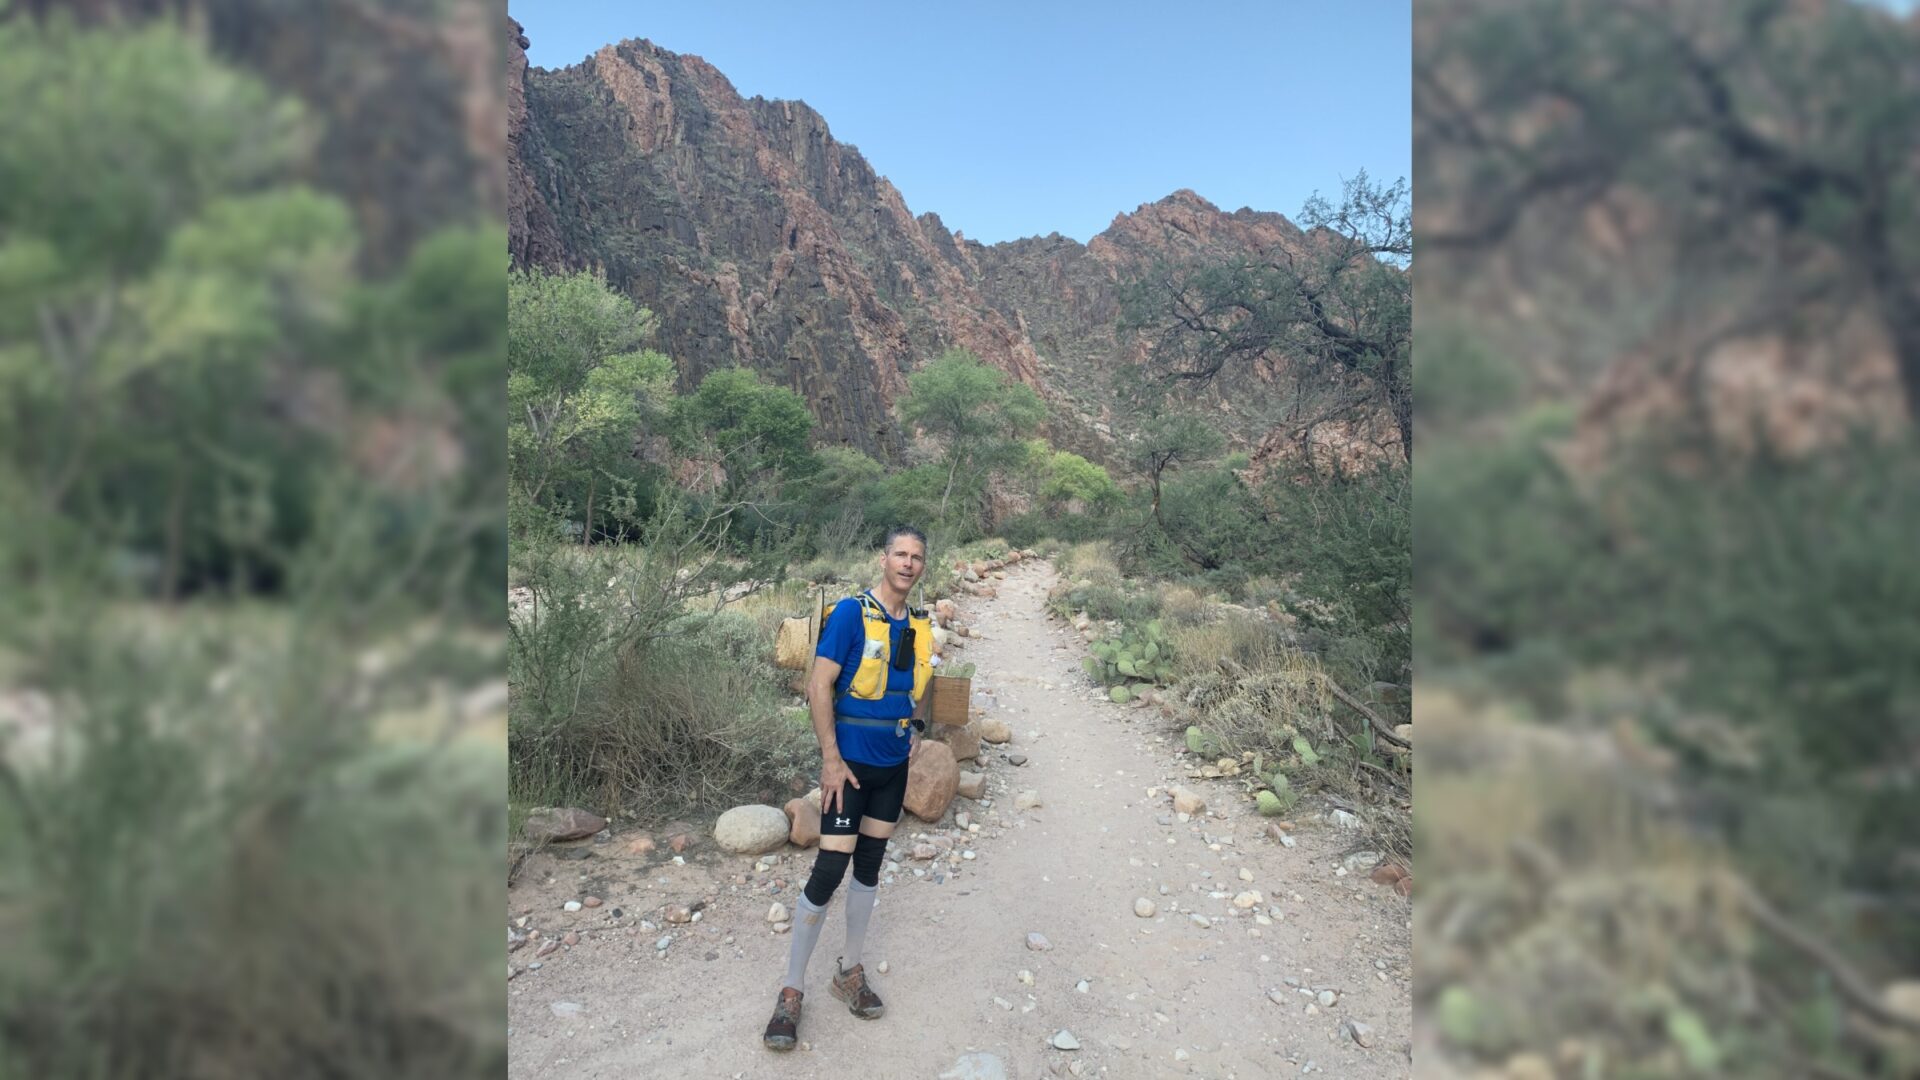 Coach Gordo Byrn on a trail in the Grand Canyon